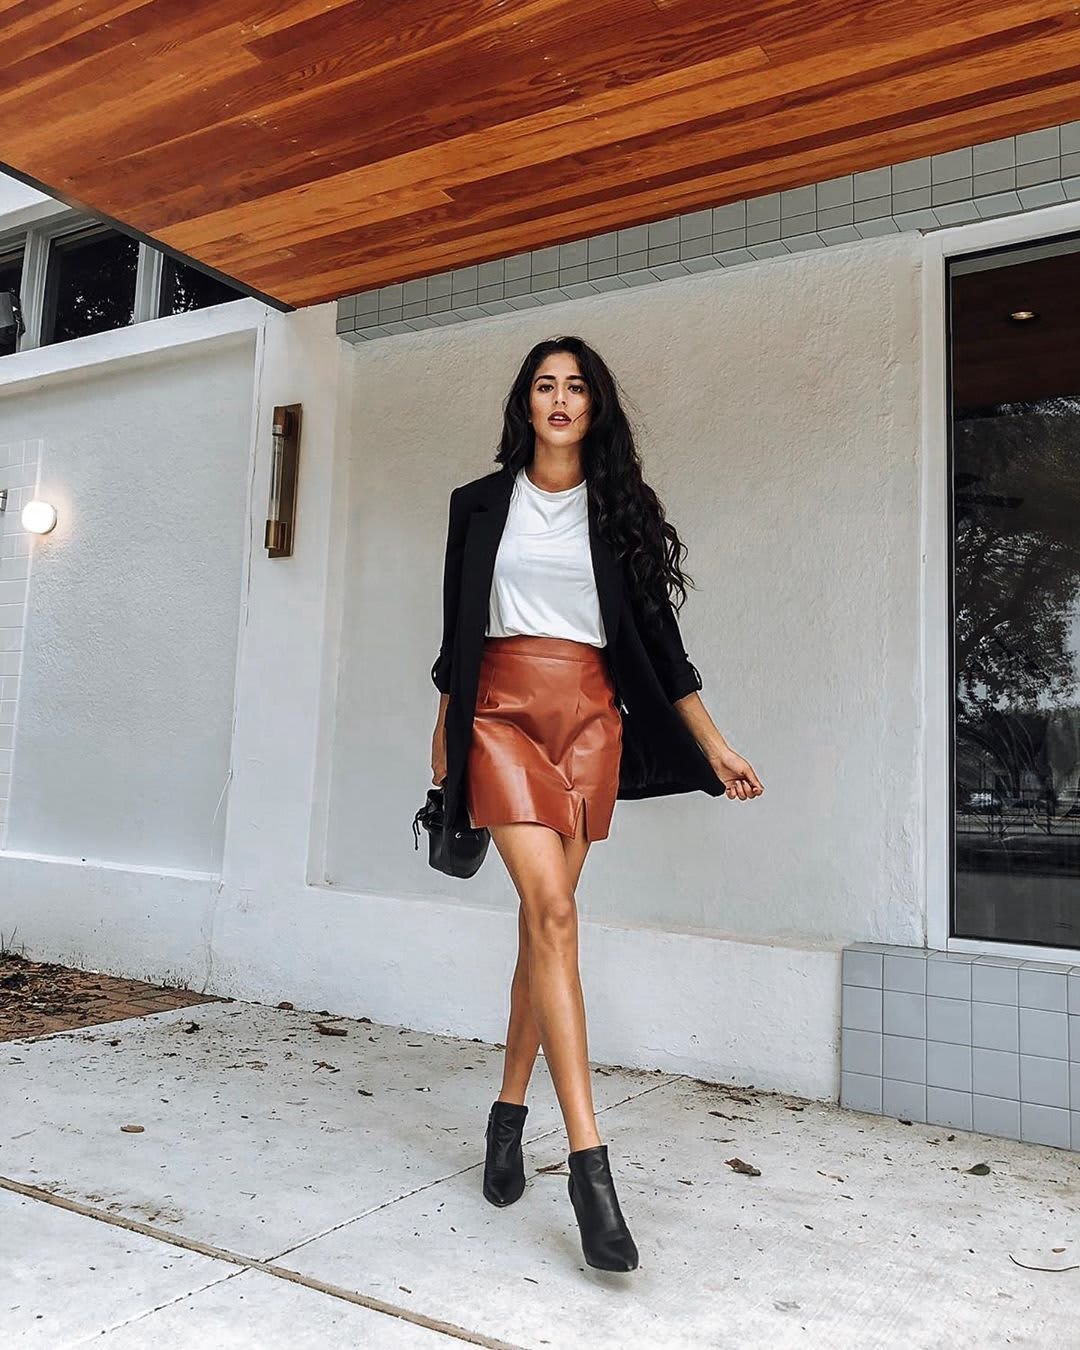 missile Supersonic speed Ace Leather Skirt Outfit Ideas for Fall and Winter - Lulus.com Fashion Blog